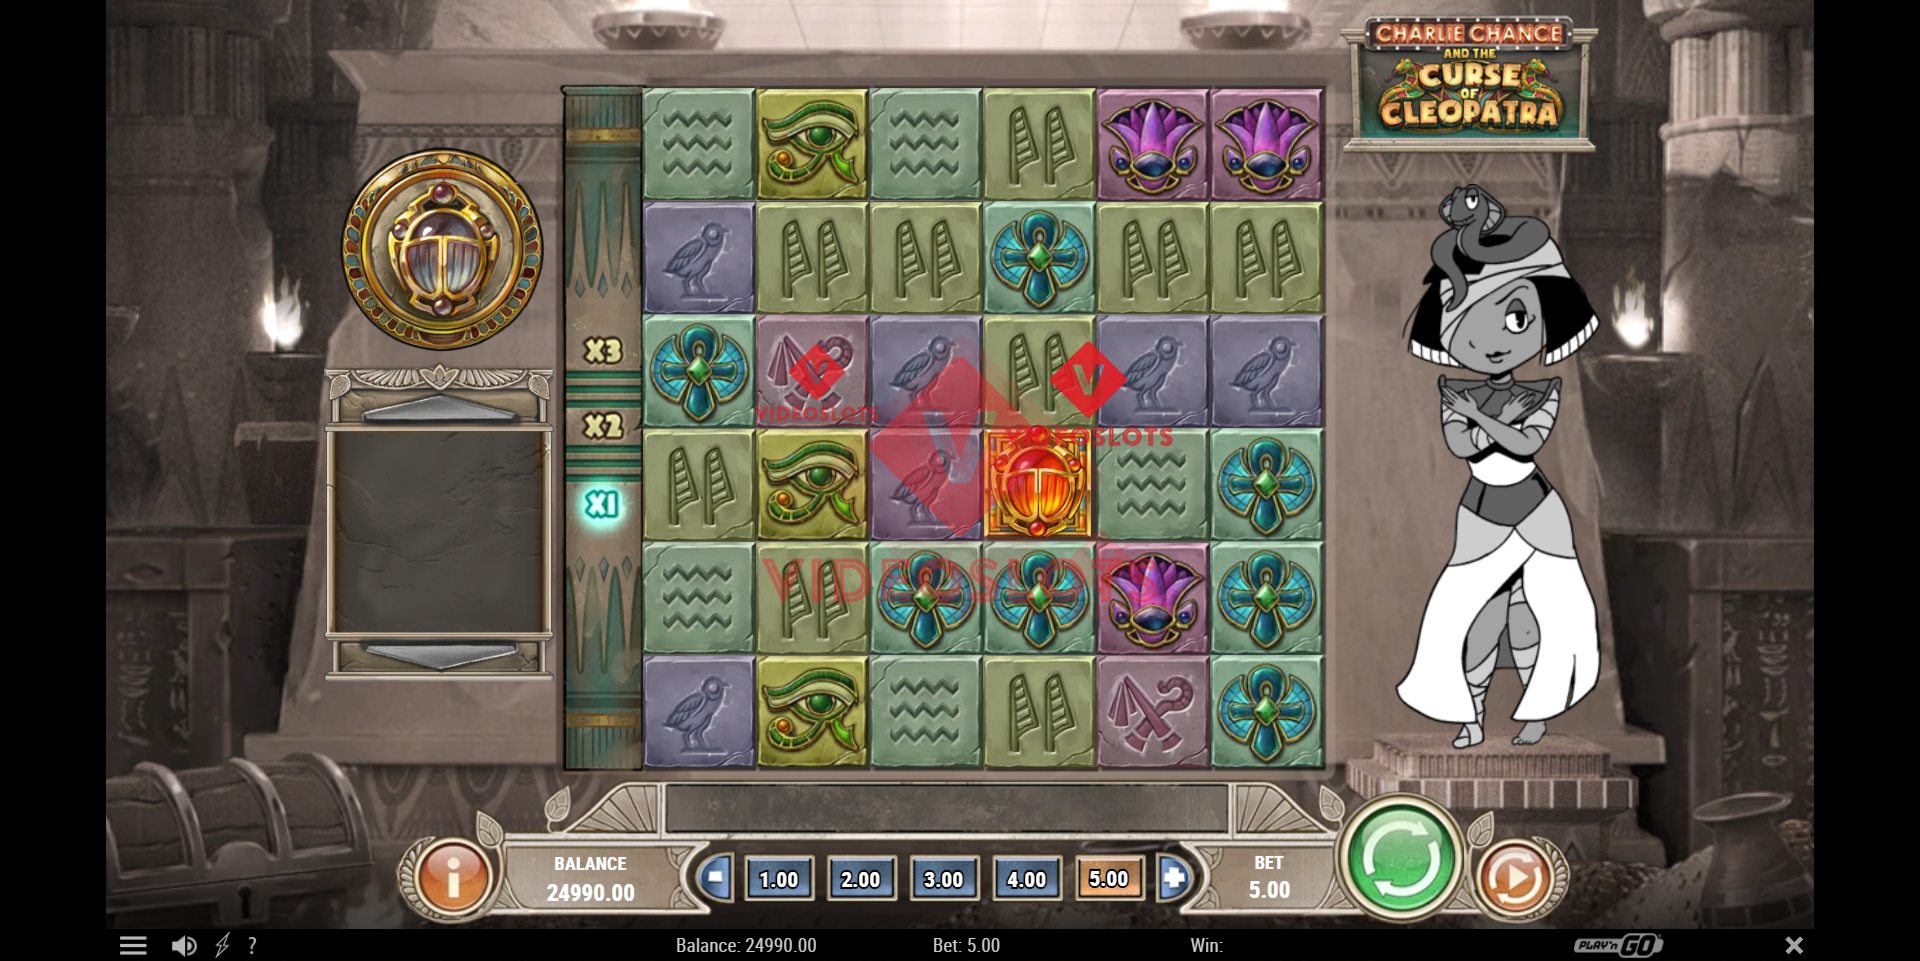 Base Game for Charlie Chance and the Curse of Cleopatra slot from Play'n Go